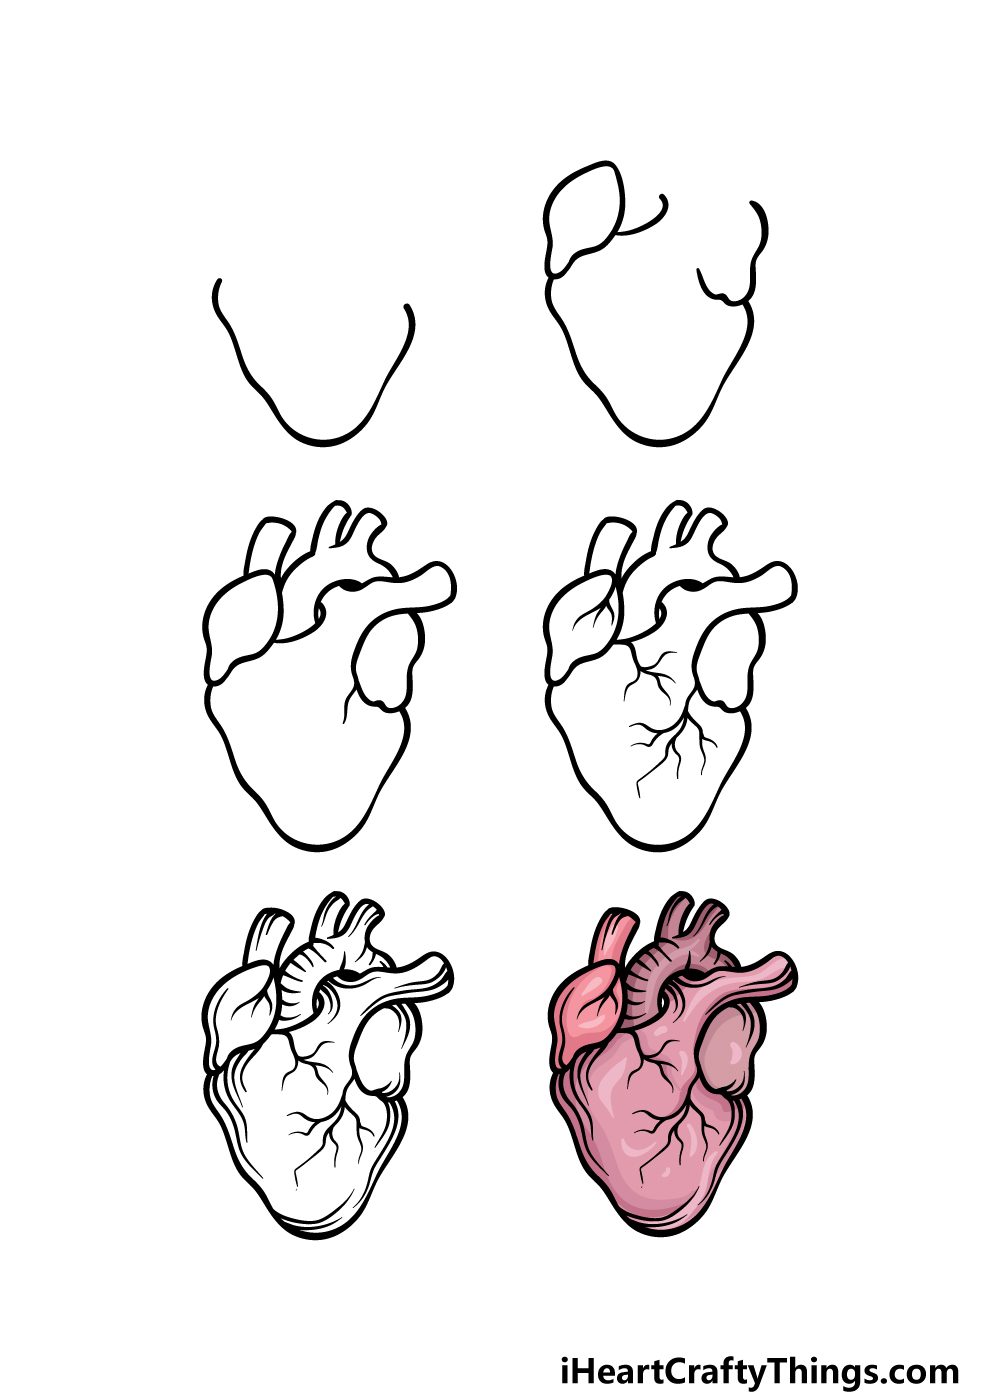 how to draw a realistic heart in 6 steps